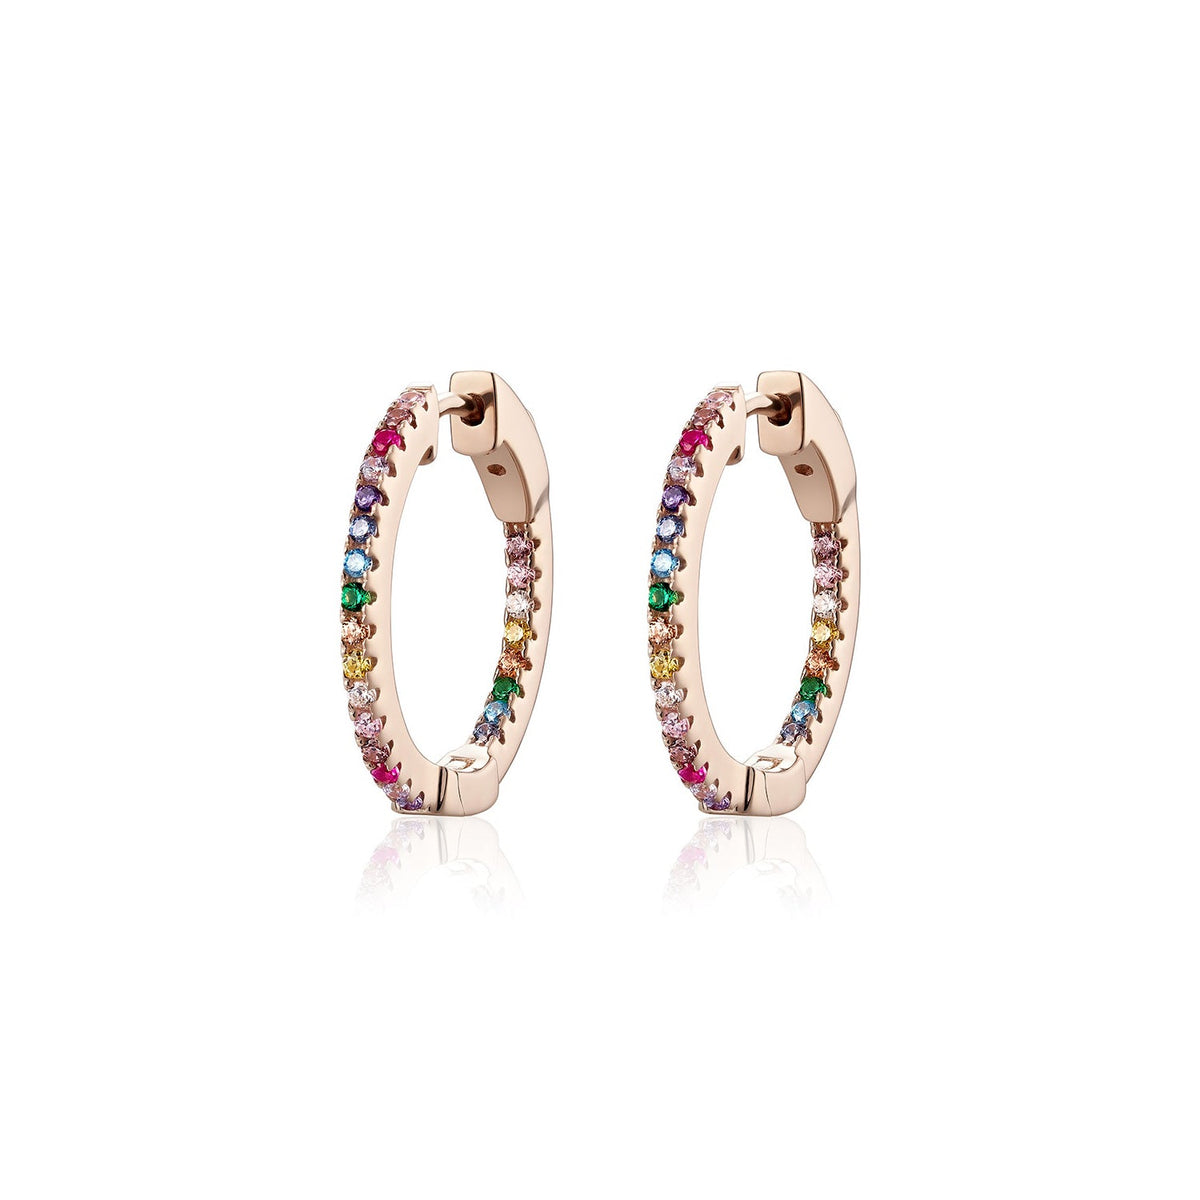 Small Inside Out Hoops in Rose, Rainbow Stones